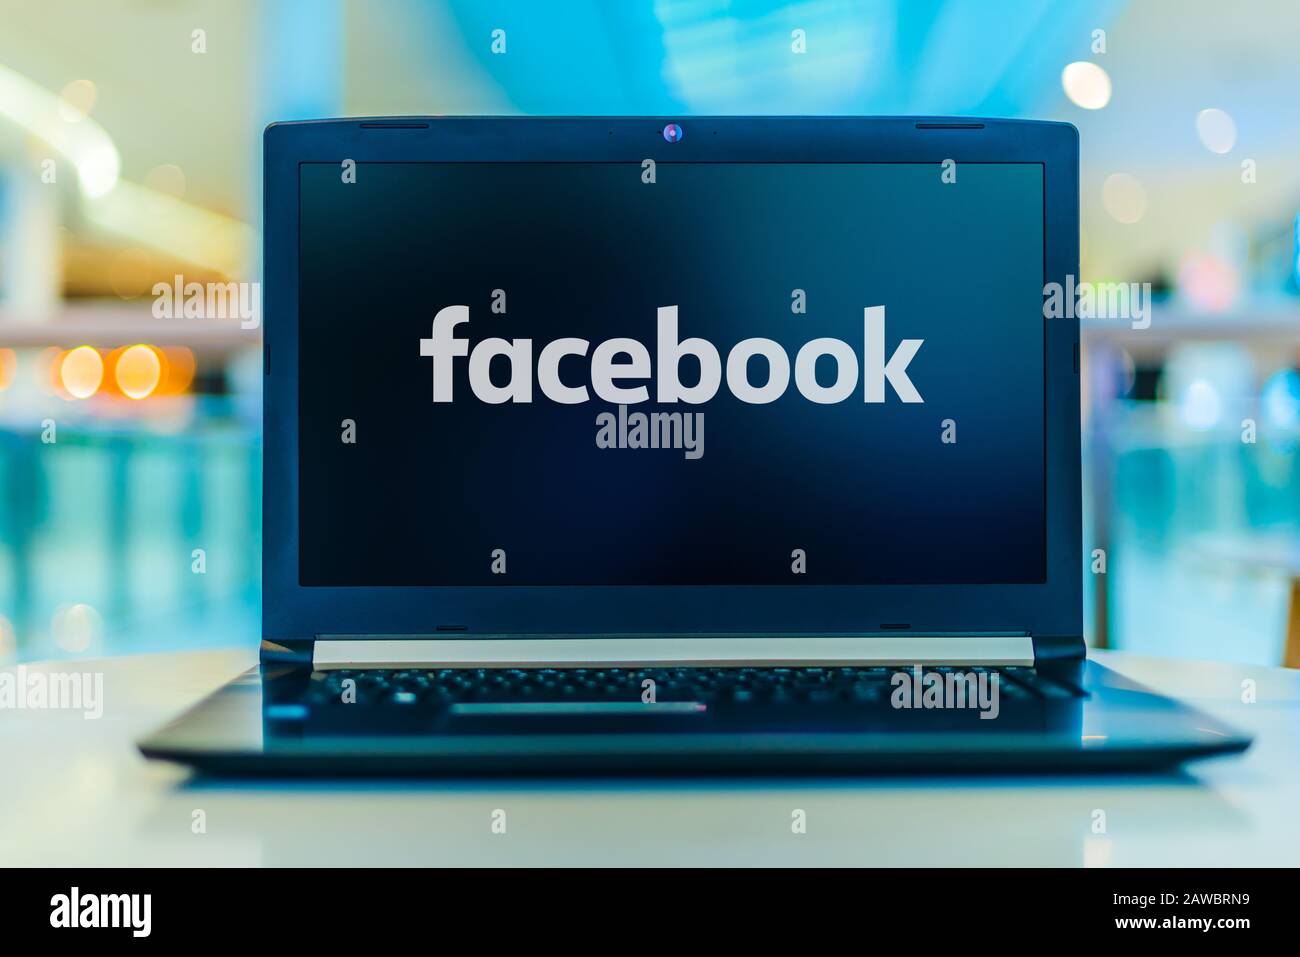 POZNAN, POL - JAN 30, 2020: Laptop computer displaying logo of Facebook, an American online social media and social networking service company based i Stock Photo